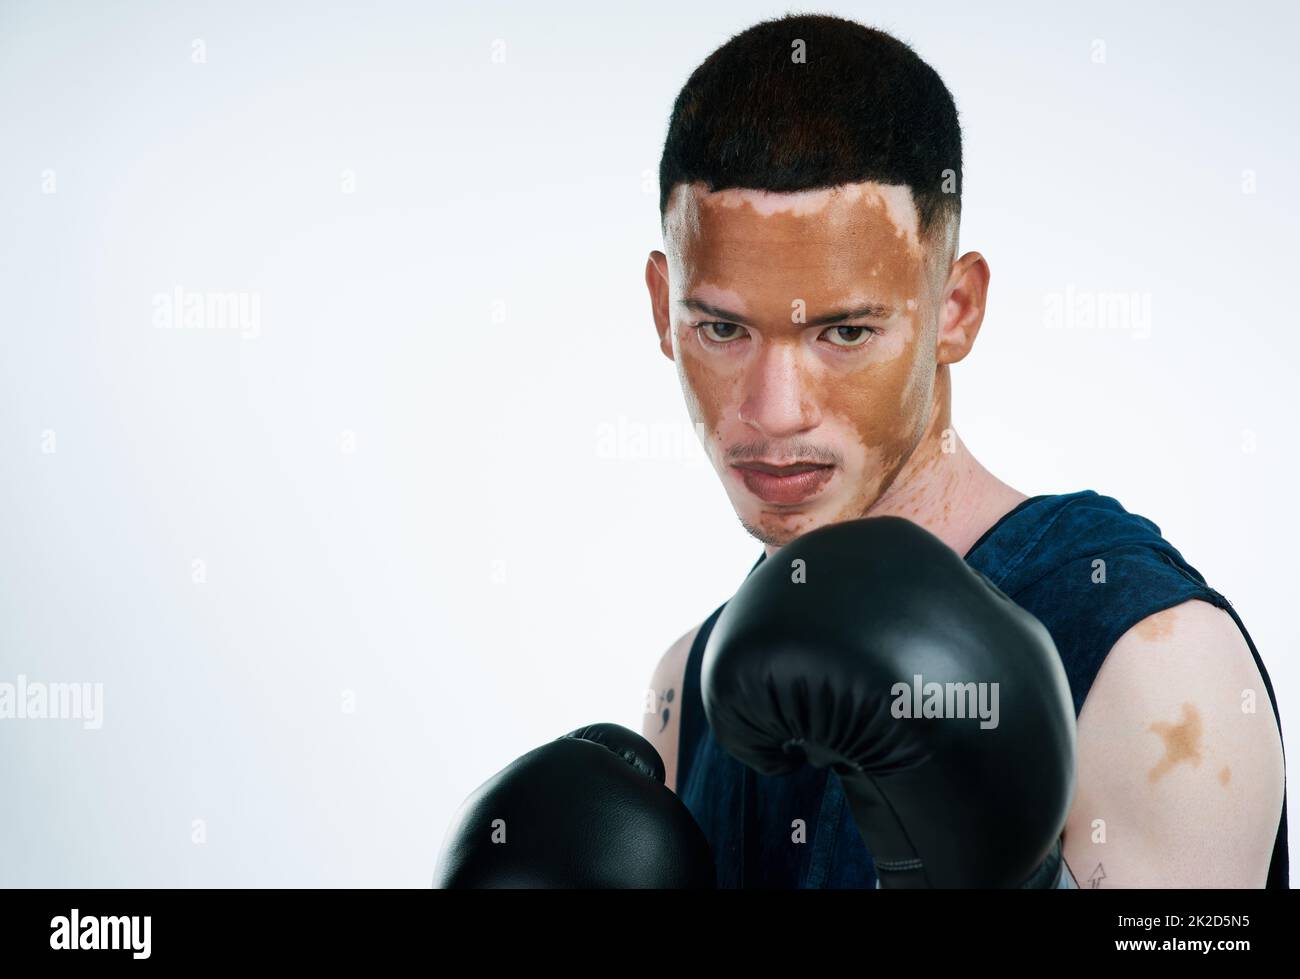 When life gets harder challenge yourself to be stronger. Portrait shot of a handsome young male boxer with vitiligo posing in studio. Stock Photo